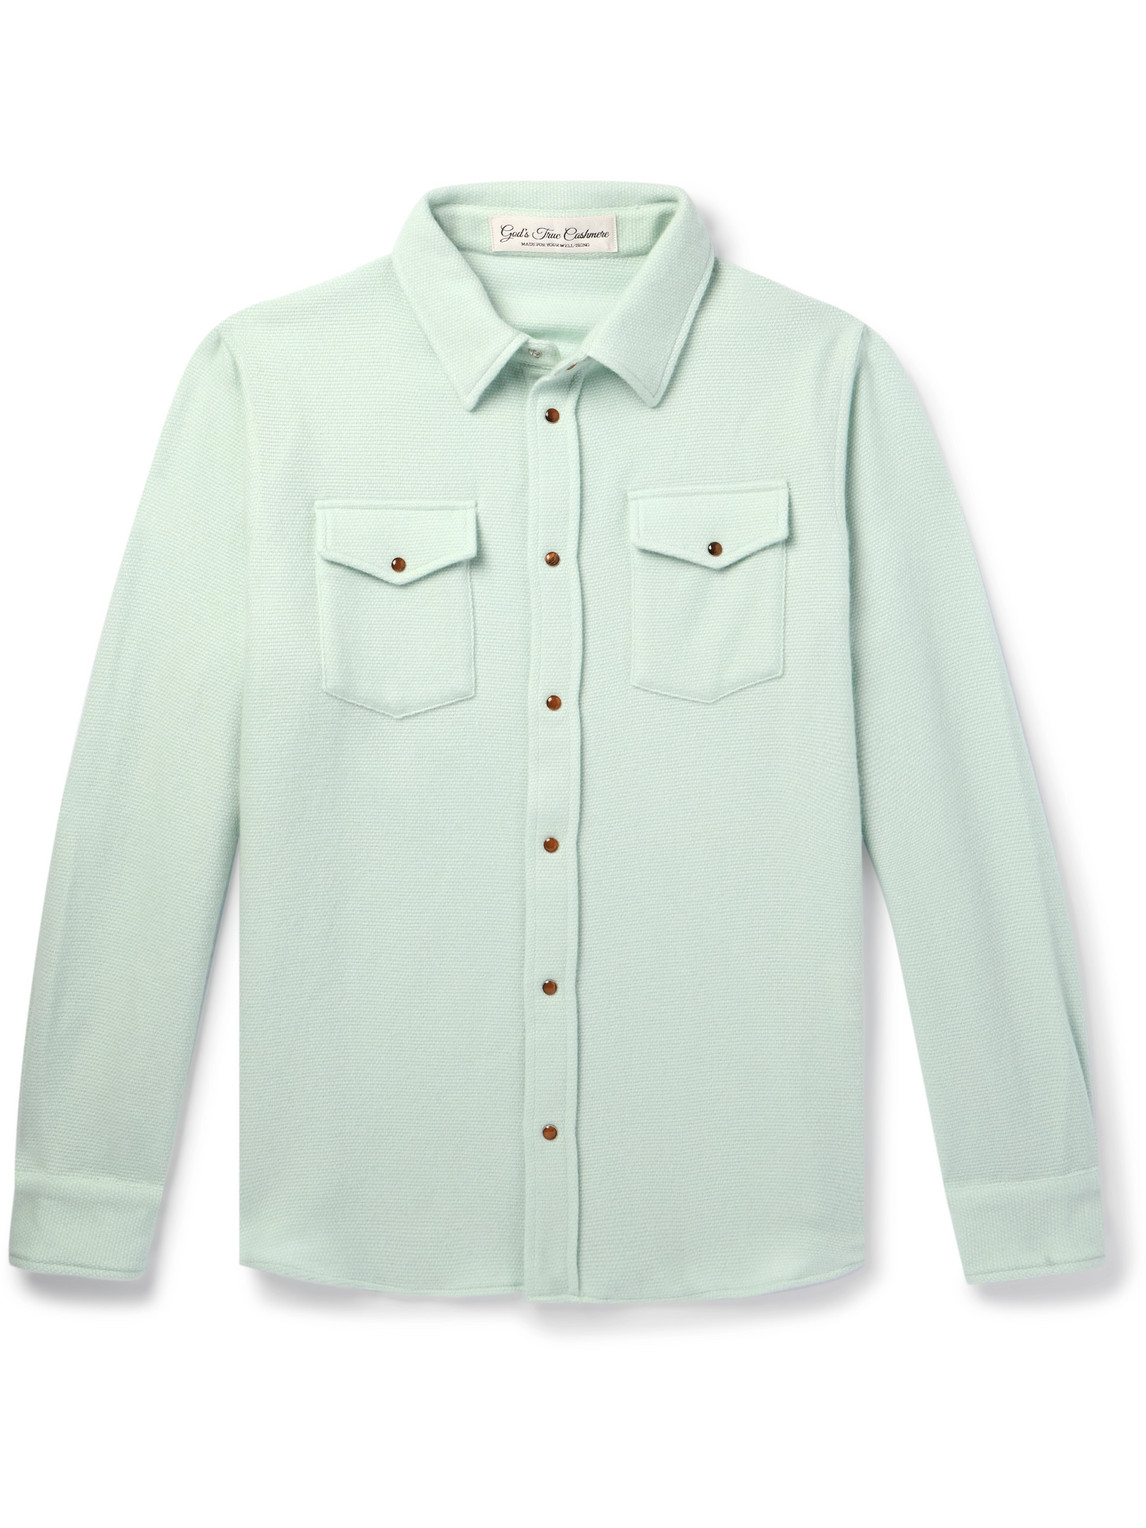 God's True Cashmere Cashmere Shirt In Green